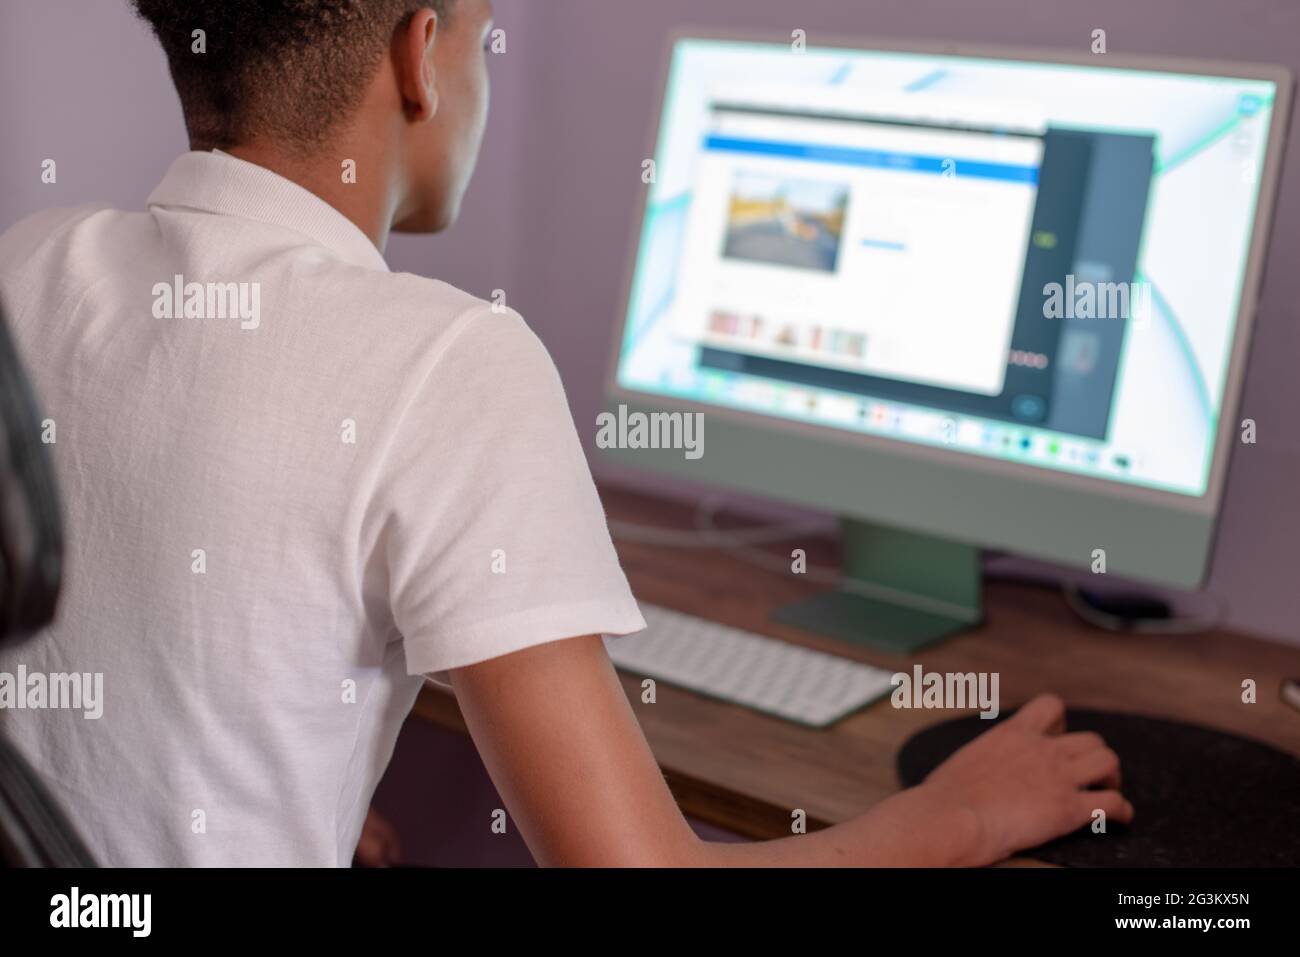 Rear view of young boy using computer at home Stock Photo